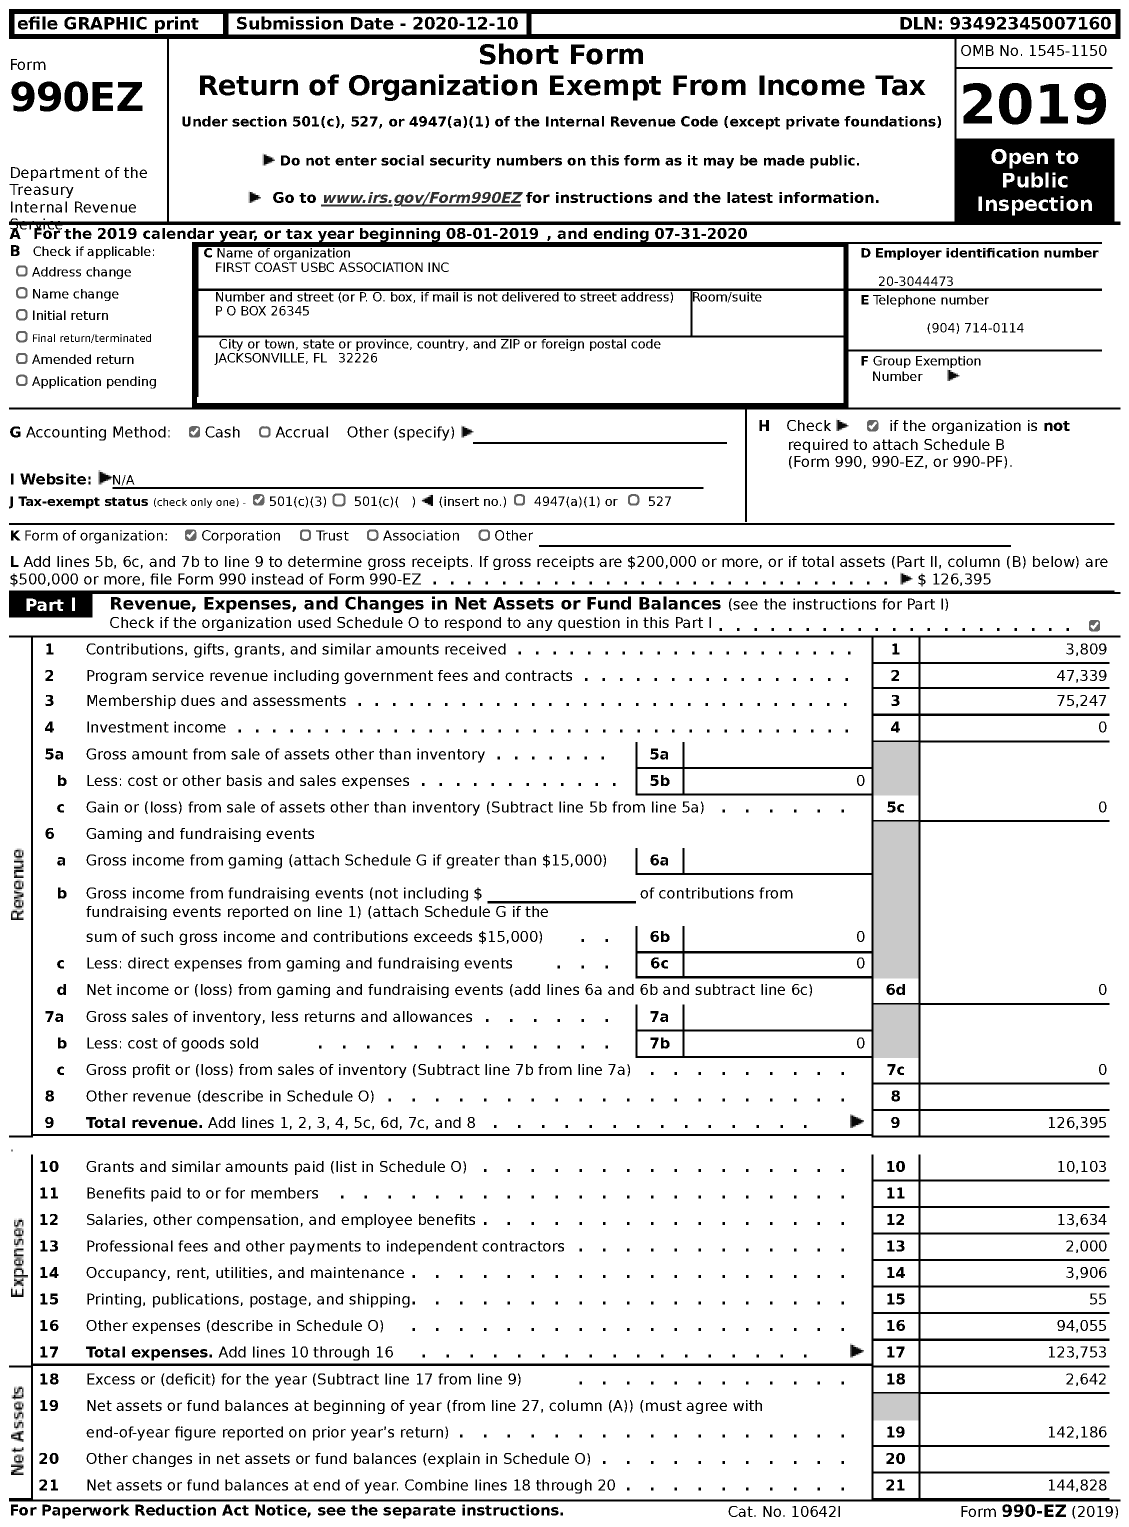 Image of first page of 2019 Form 990EZ for United States Bowling Congress - 82117 First Coast Usbc